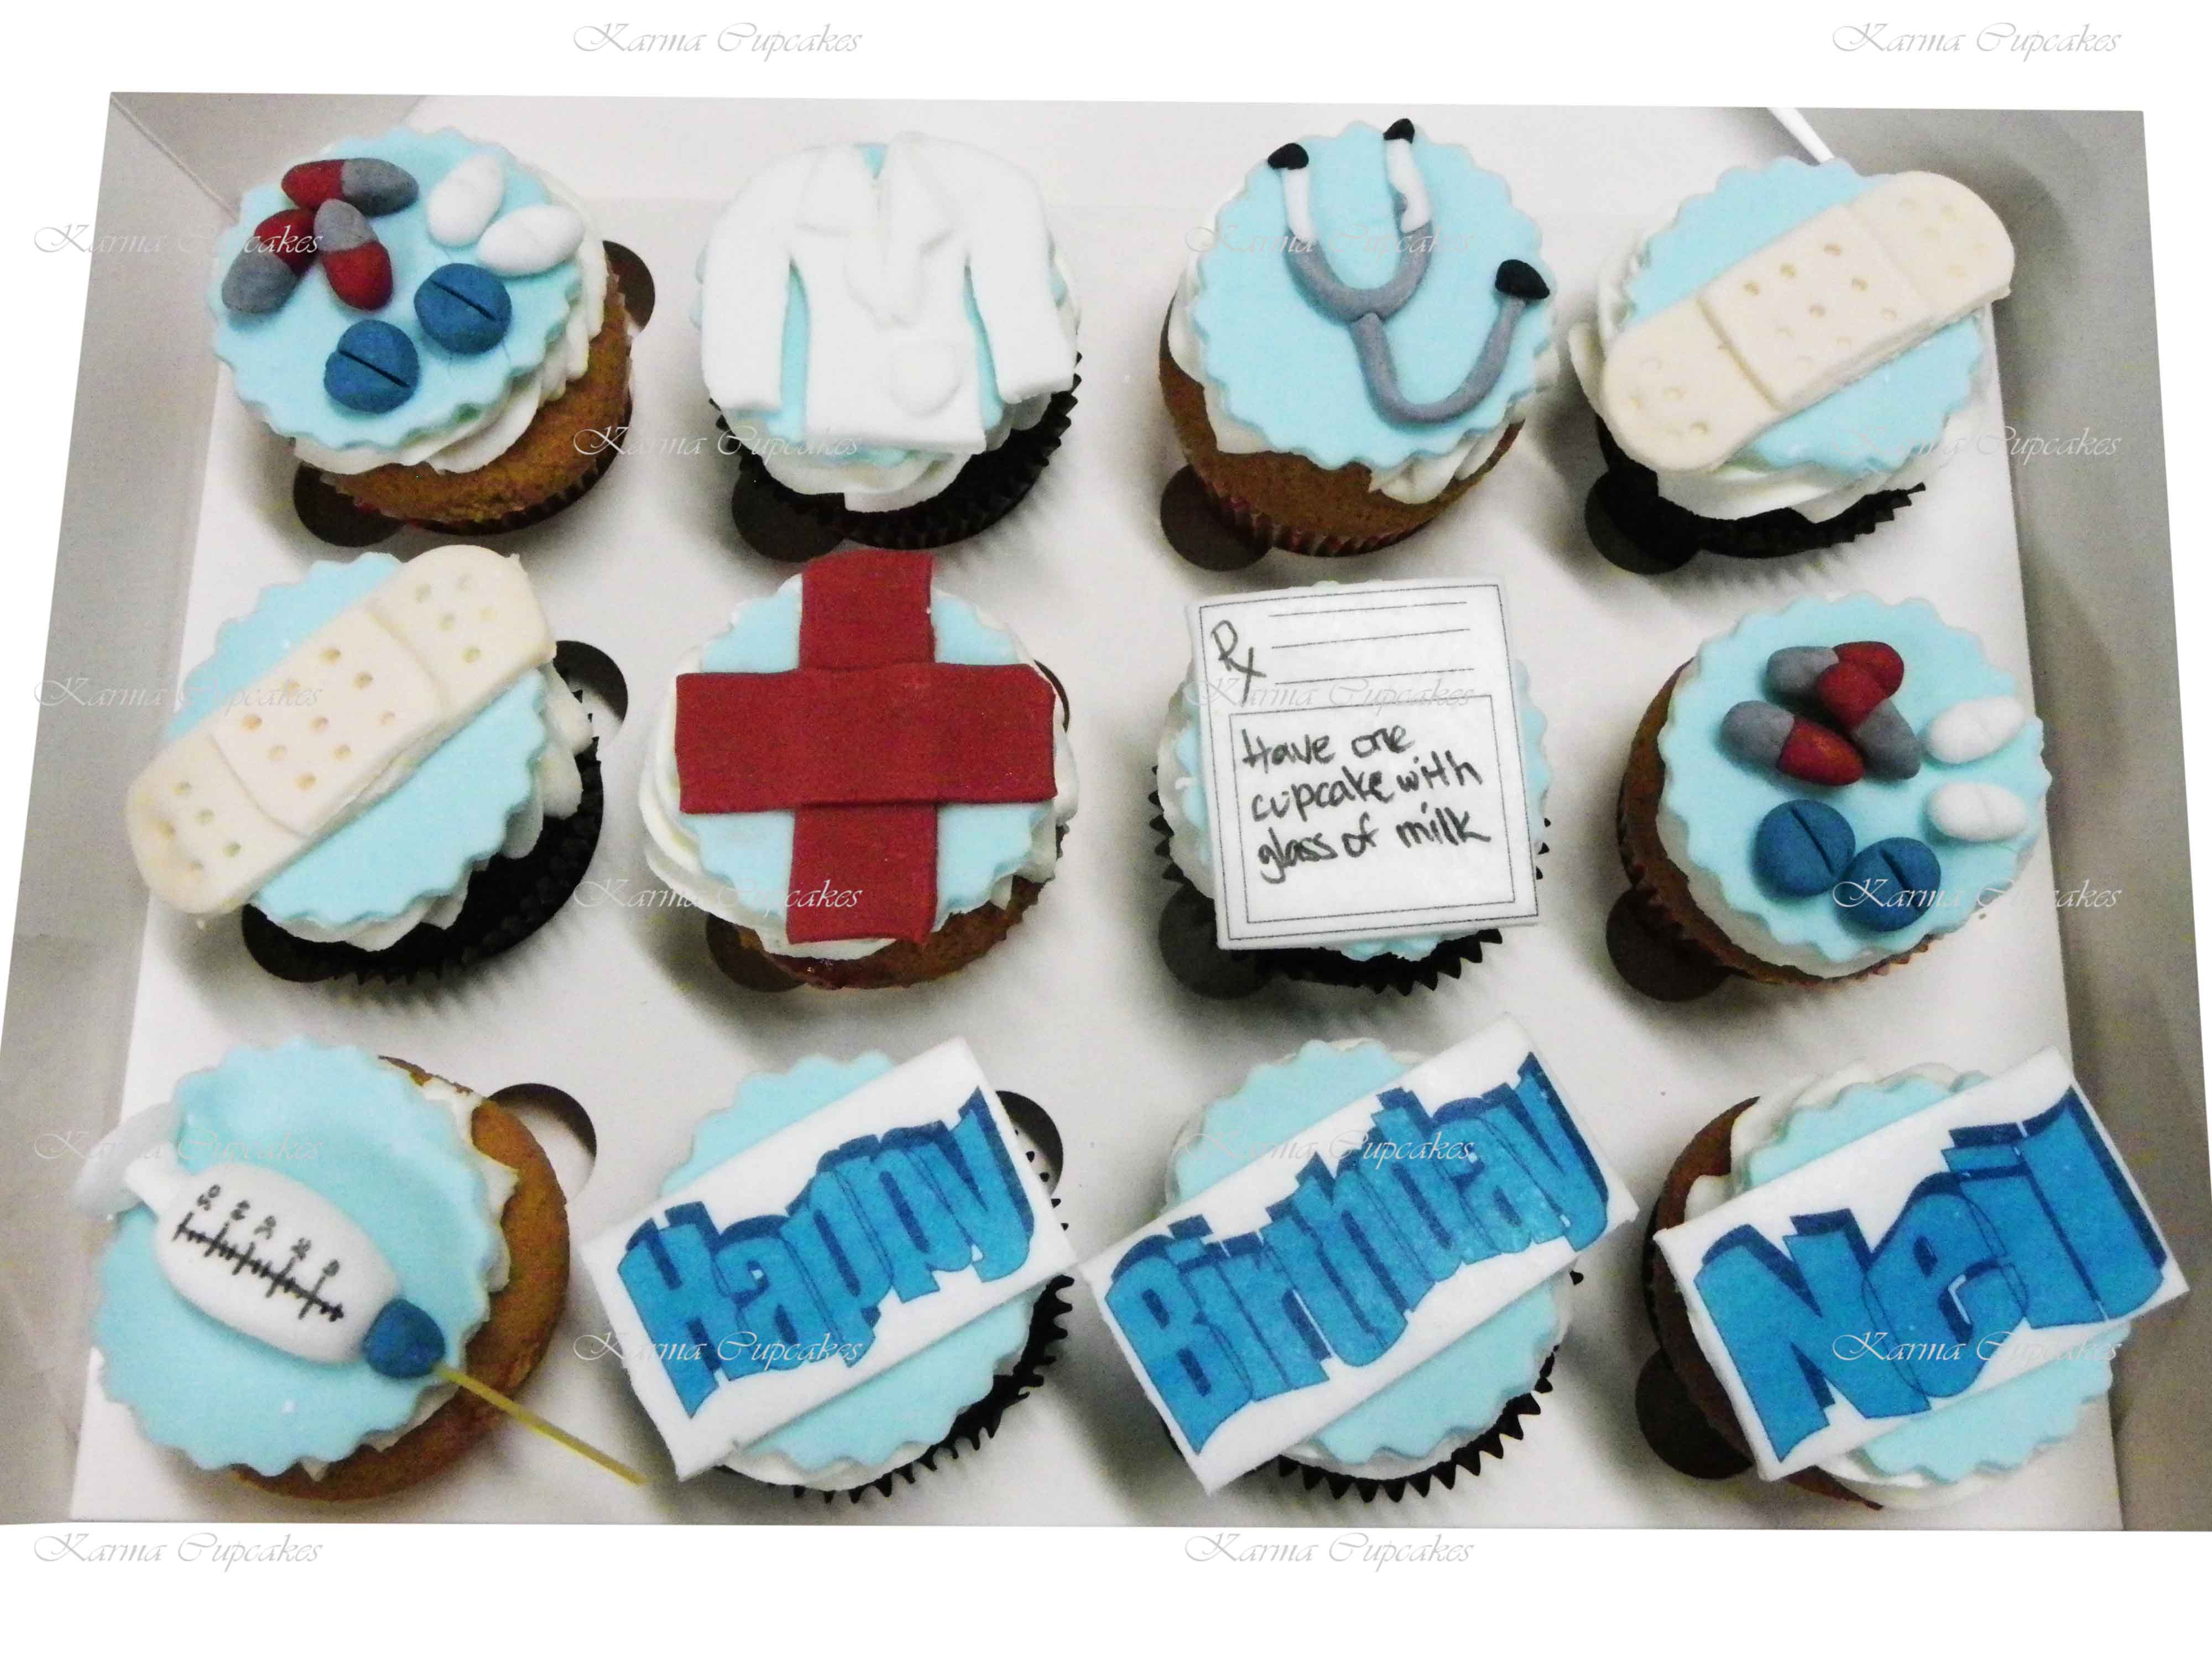 Cupcakes Topped With 3d Medical Themes And Happy Birthday Edible Image